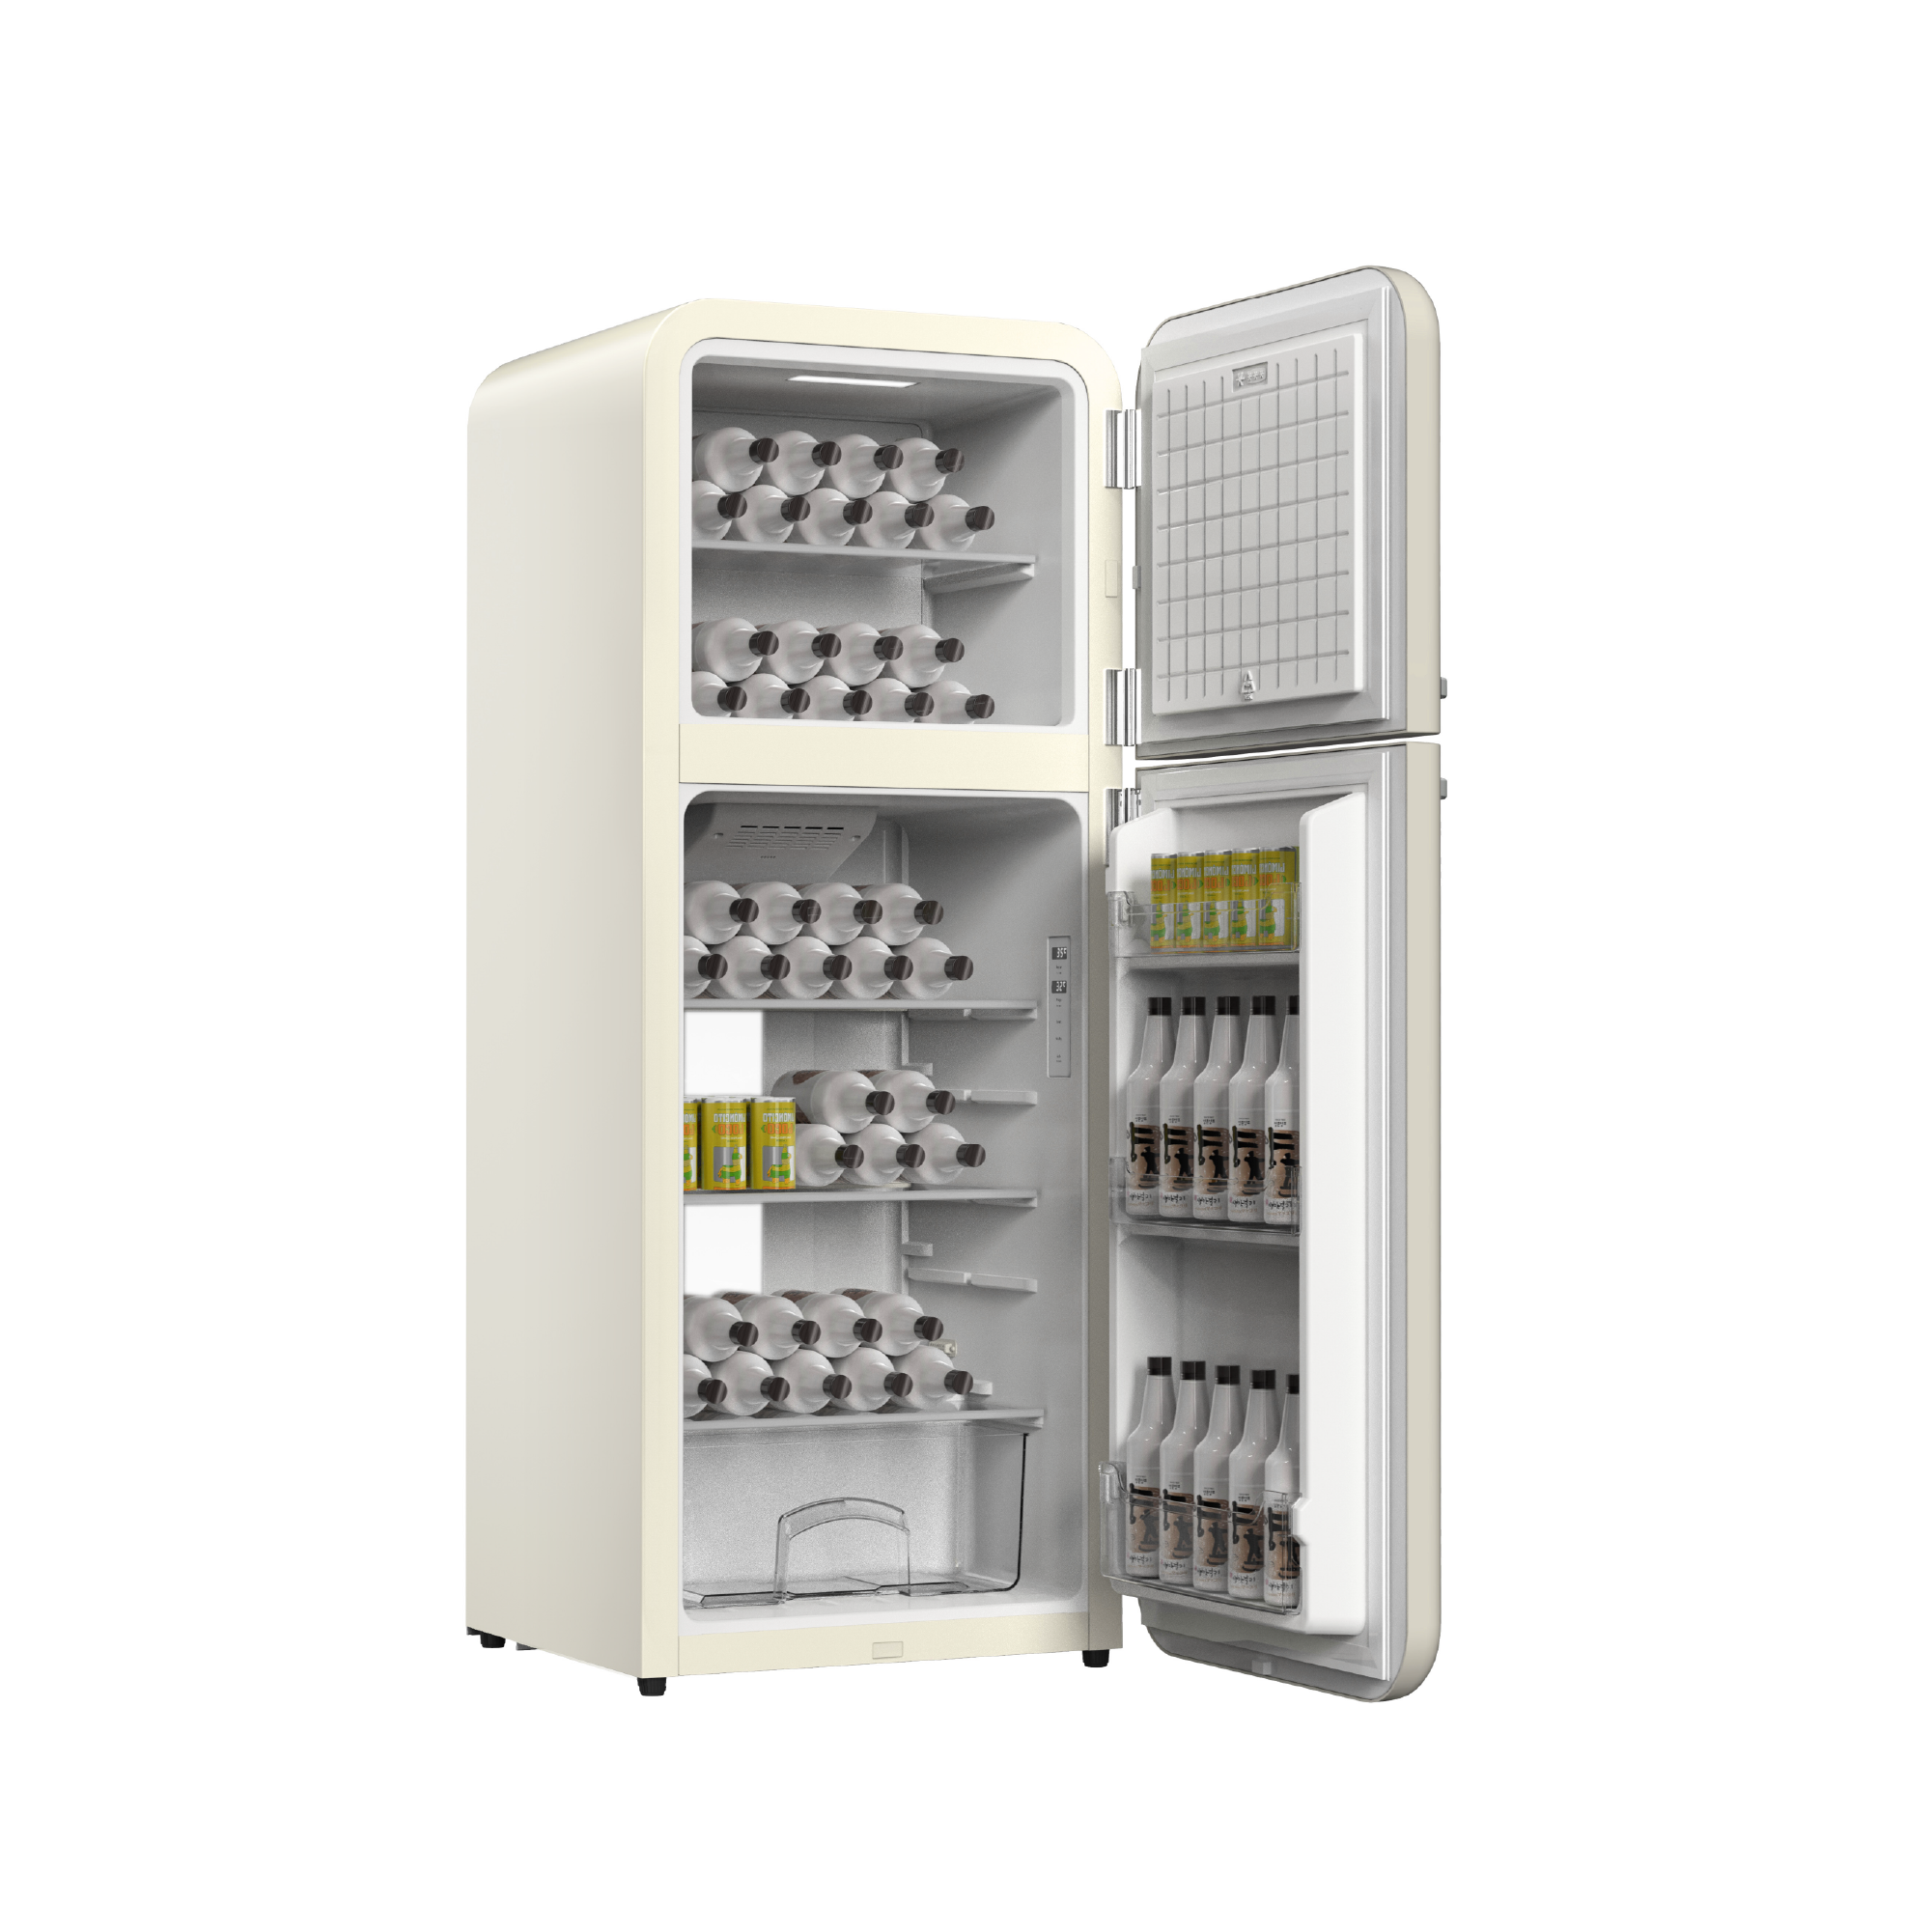  Side view of the 6.8 Cu Ft Cream Iconic Retro Fridge With Top Freezer with the doors open, displaying one glass shelf in the freezer compartment and three glass shelves, accompanied by a transparent drawer in the fridge compartment. The product interior is fully stocked with beverage drinks